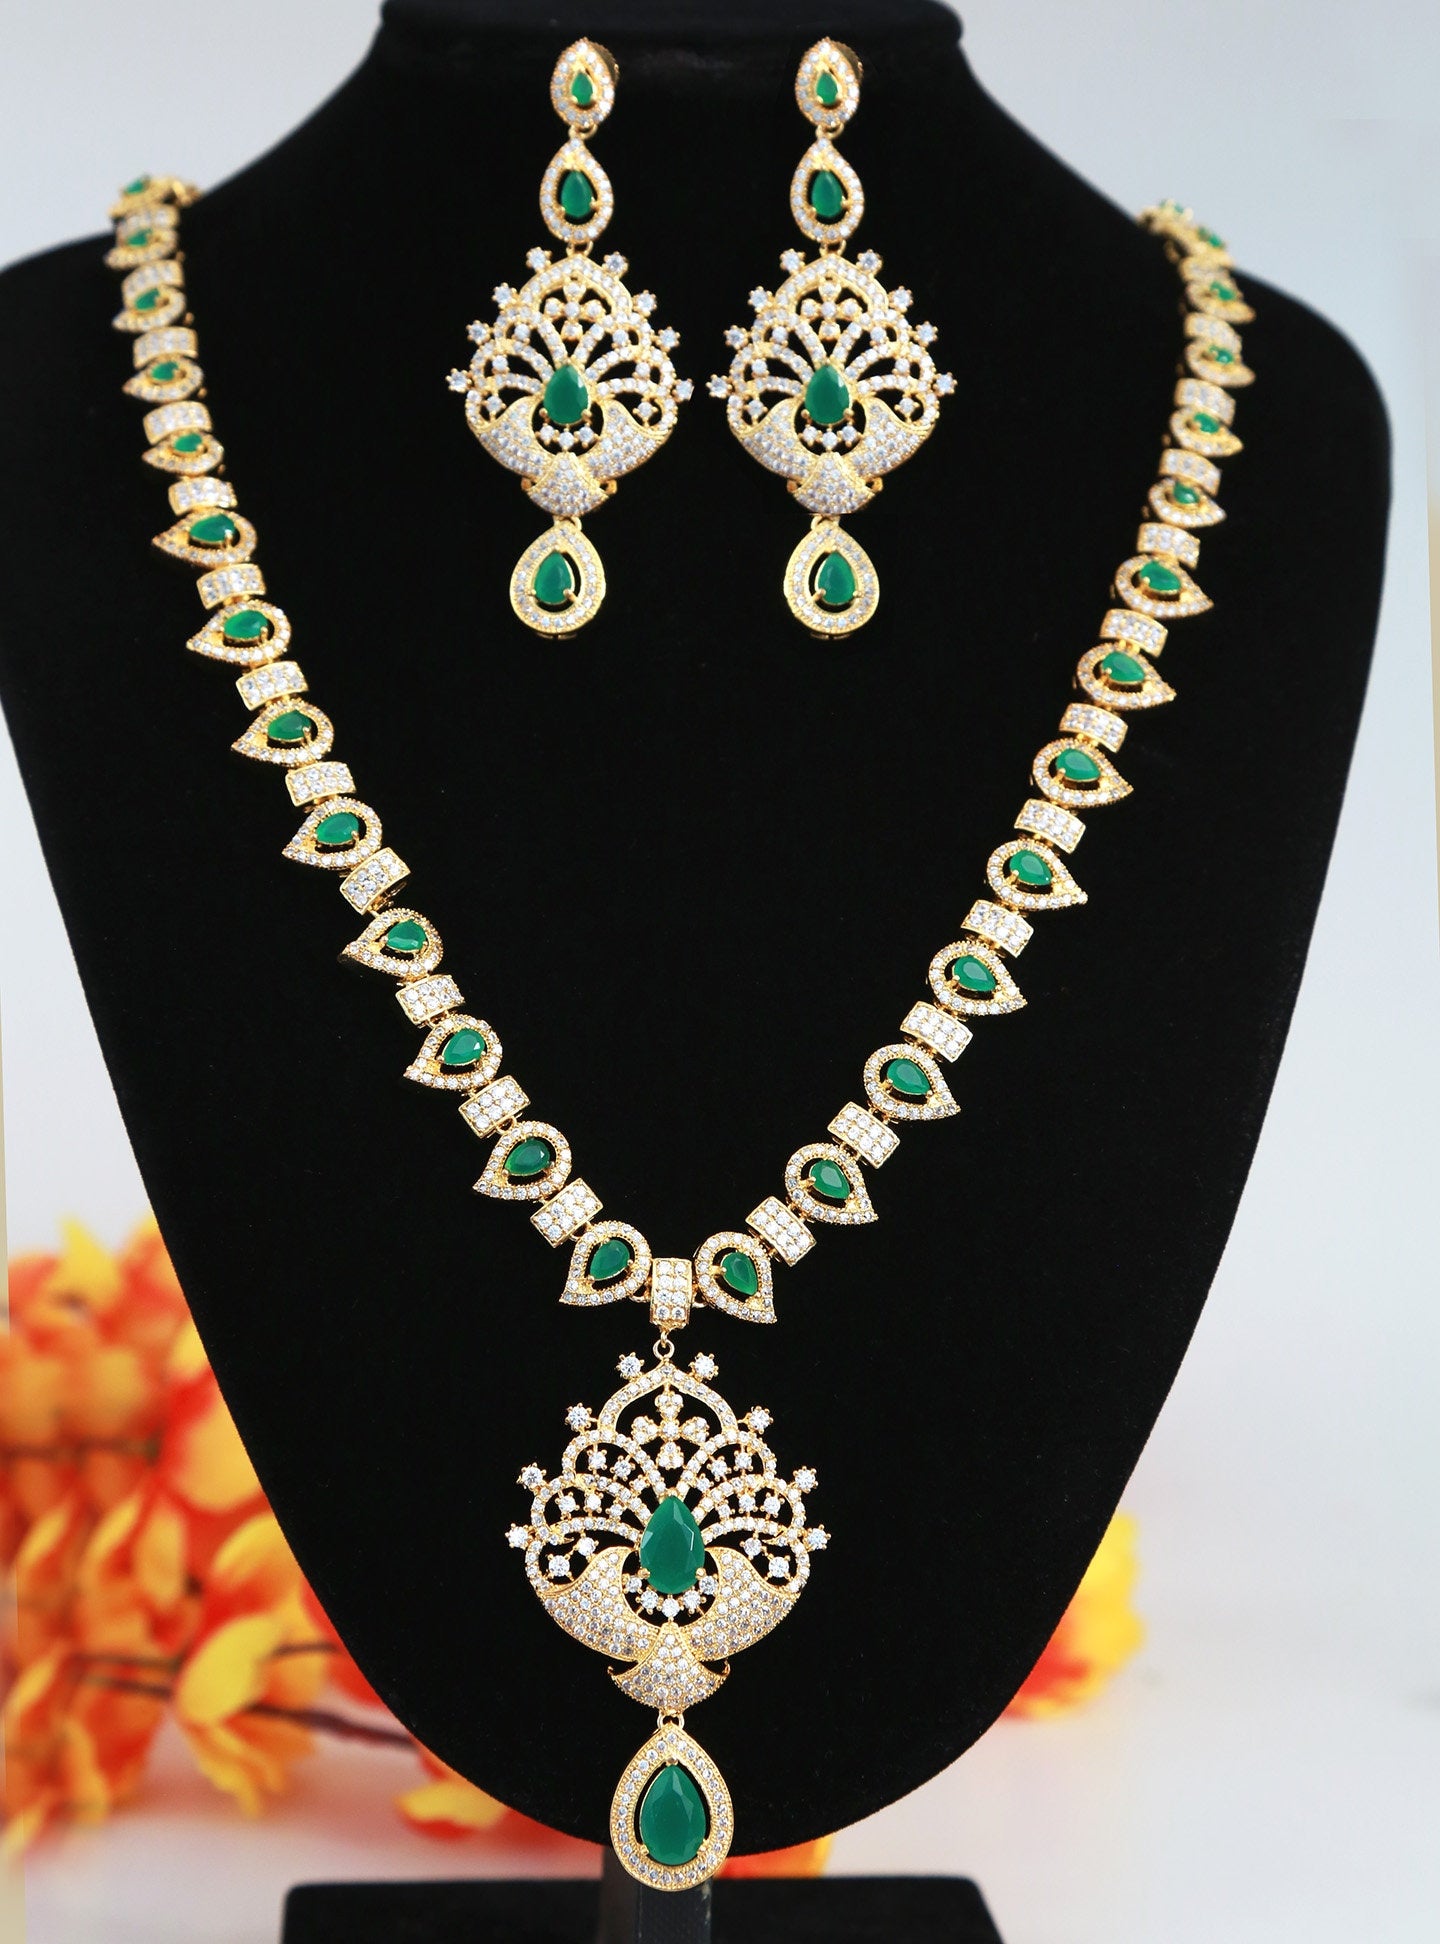 Gold Plated American Diamond Long Necklace and Earrings Set| CZ Diamond Topaz/Ruby/Emerald Stones studded Indian Wedding Bridal Jewelry